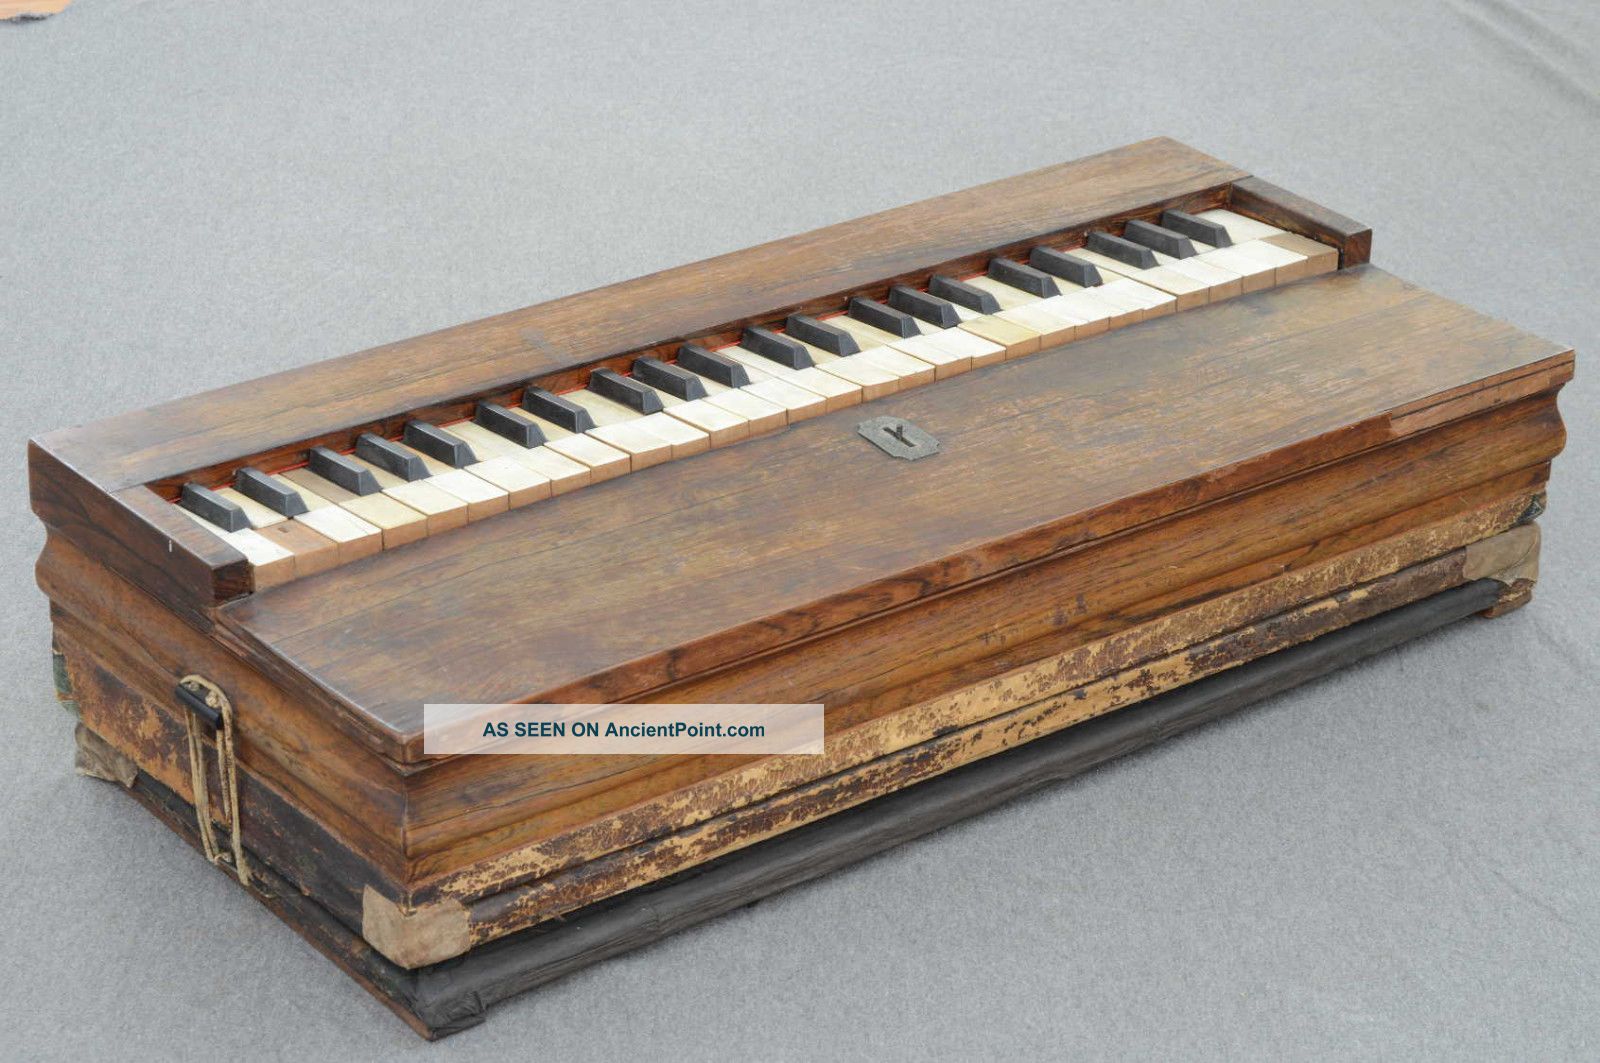 Antique Bartlett Small Reed Organ Of 1845 (elbow Melodeon) Ripe For Restoration Keyboard photo